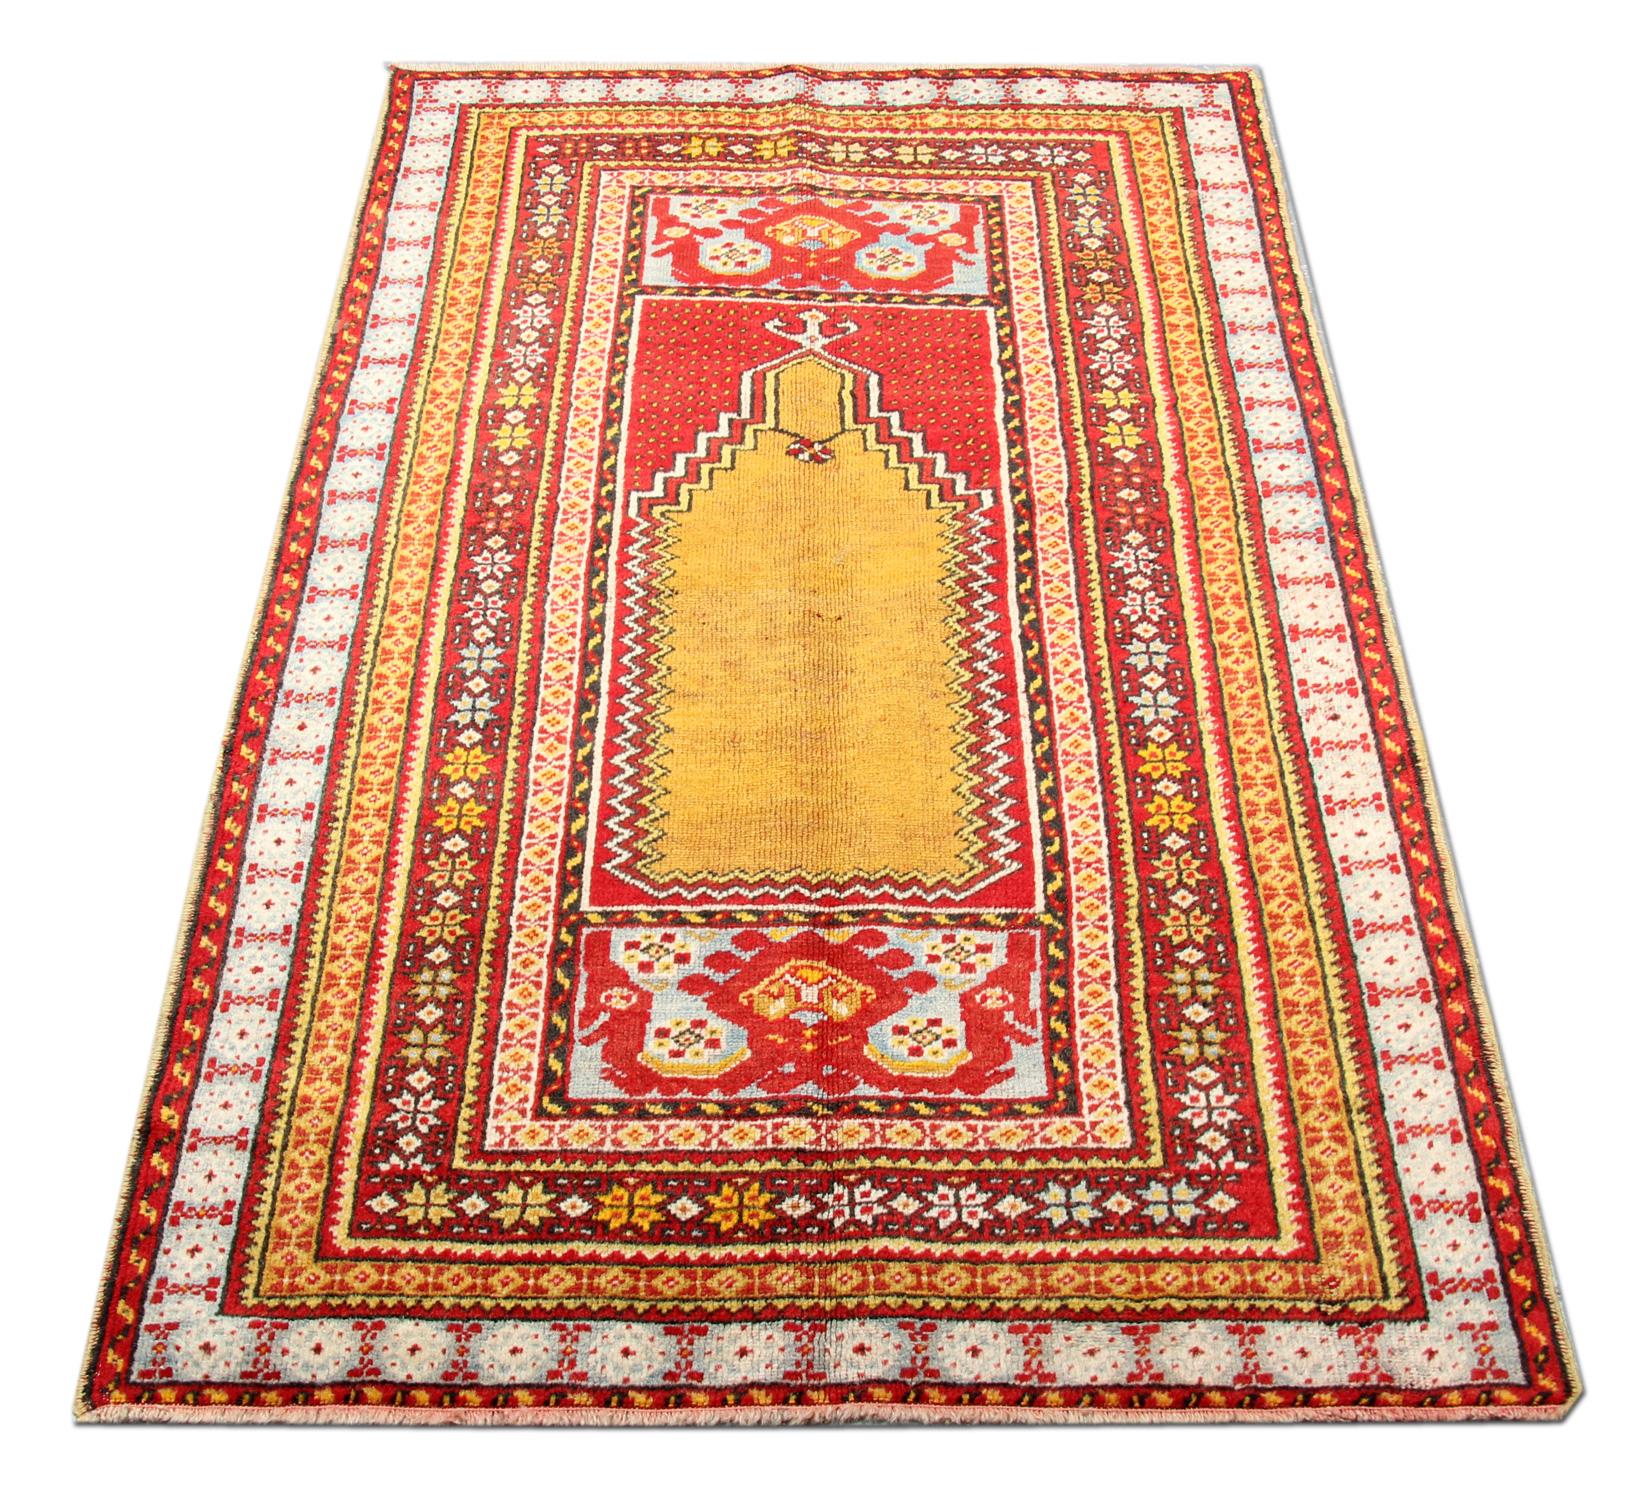 This handmade carpet soft colour vintage rug Milas carpet rests beautifully upon a field of shiny yellow rug, red, and blue colours. A relatively broad border of red and blue gently surrounds the centre field. Natural elements of stems, vines and